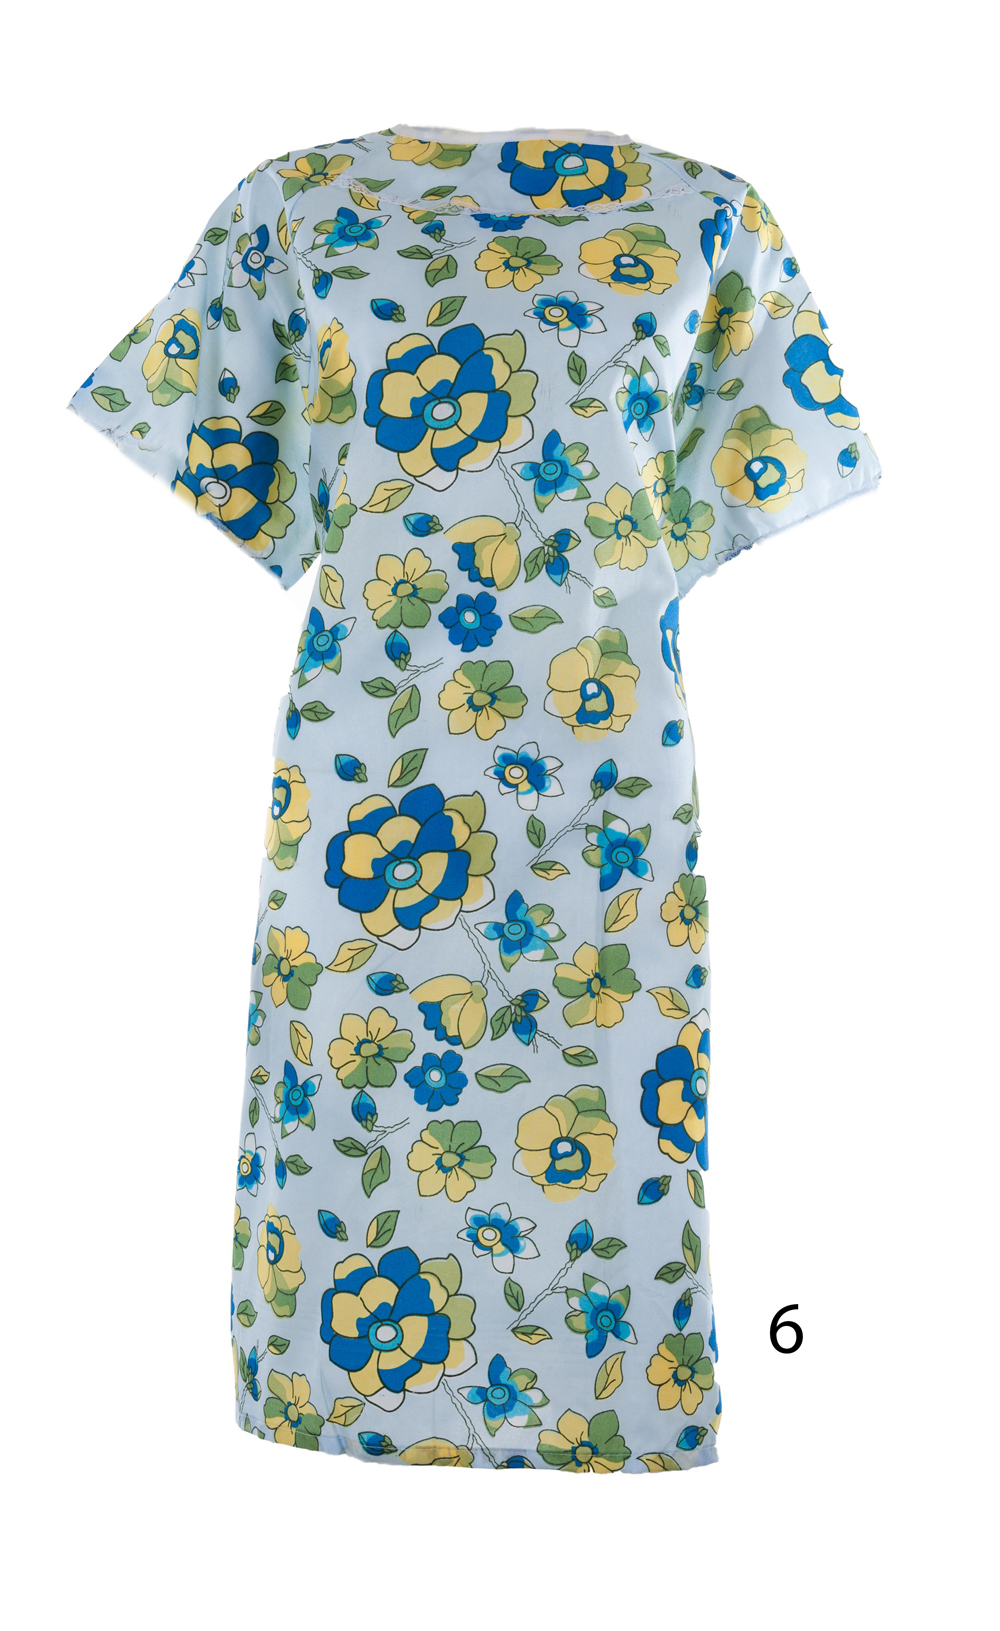 Women Adaptive Poly Cotton Backwrap Gowns 13 New Prints Just Arrived